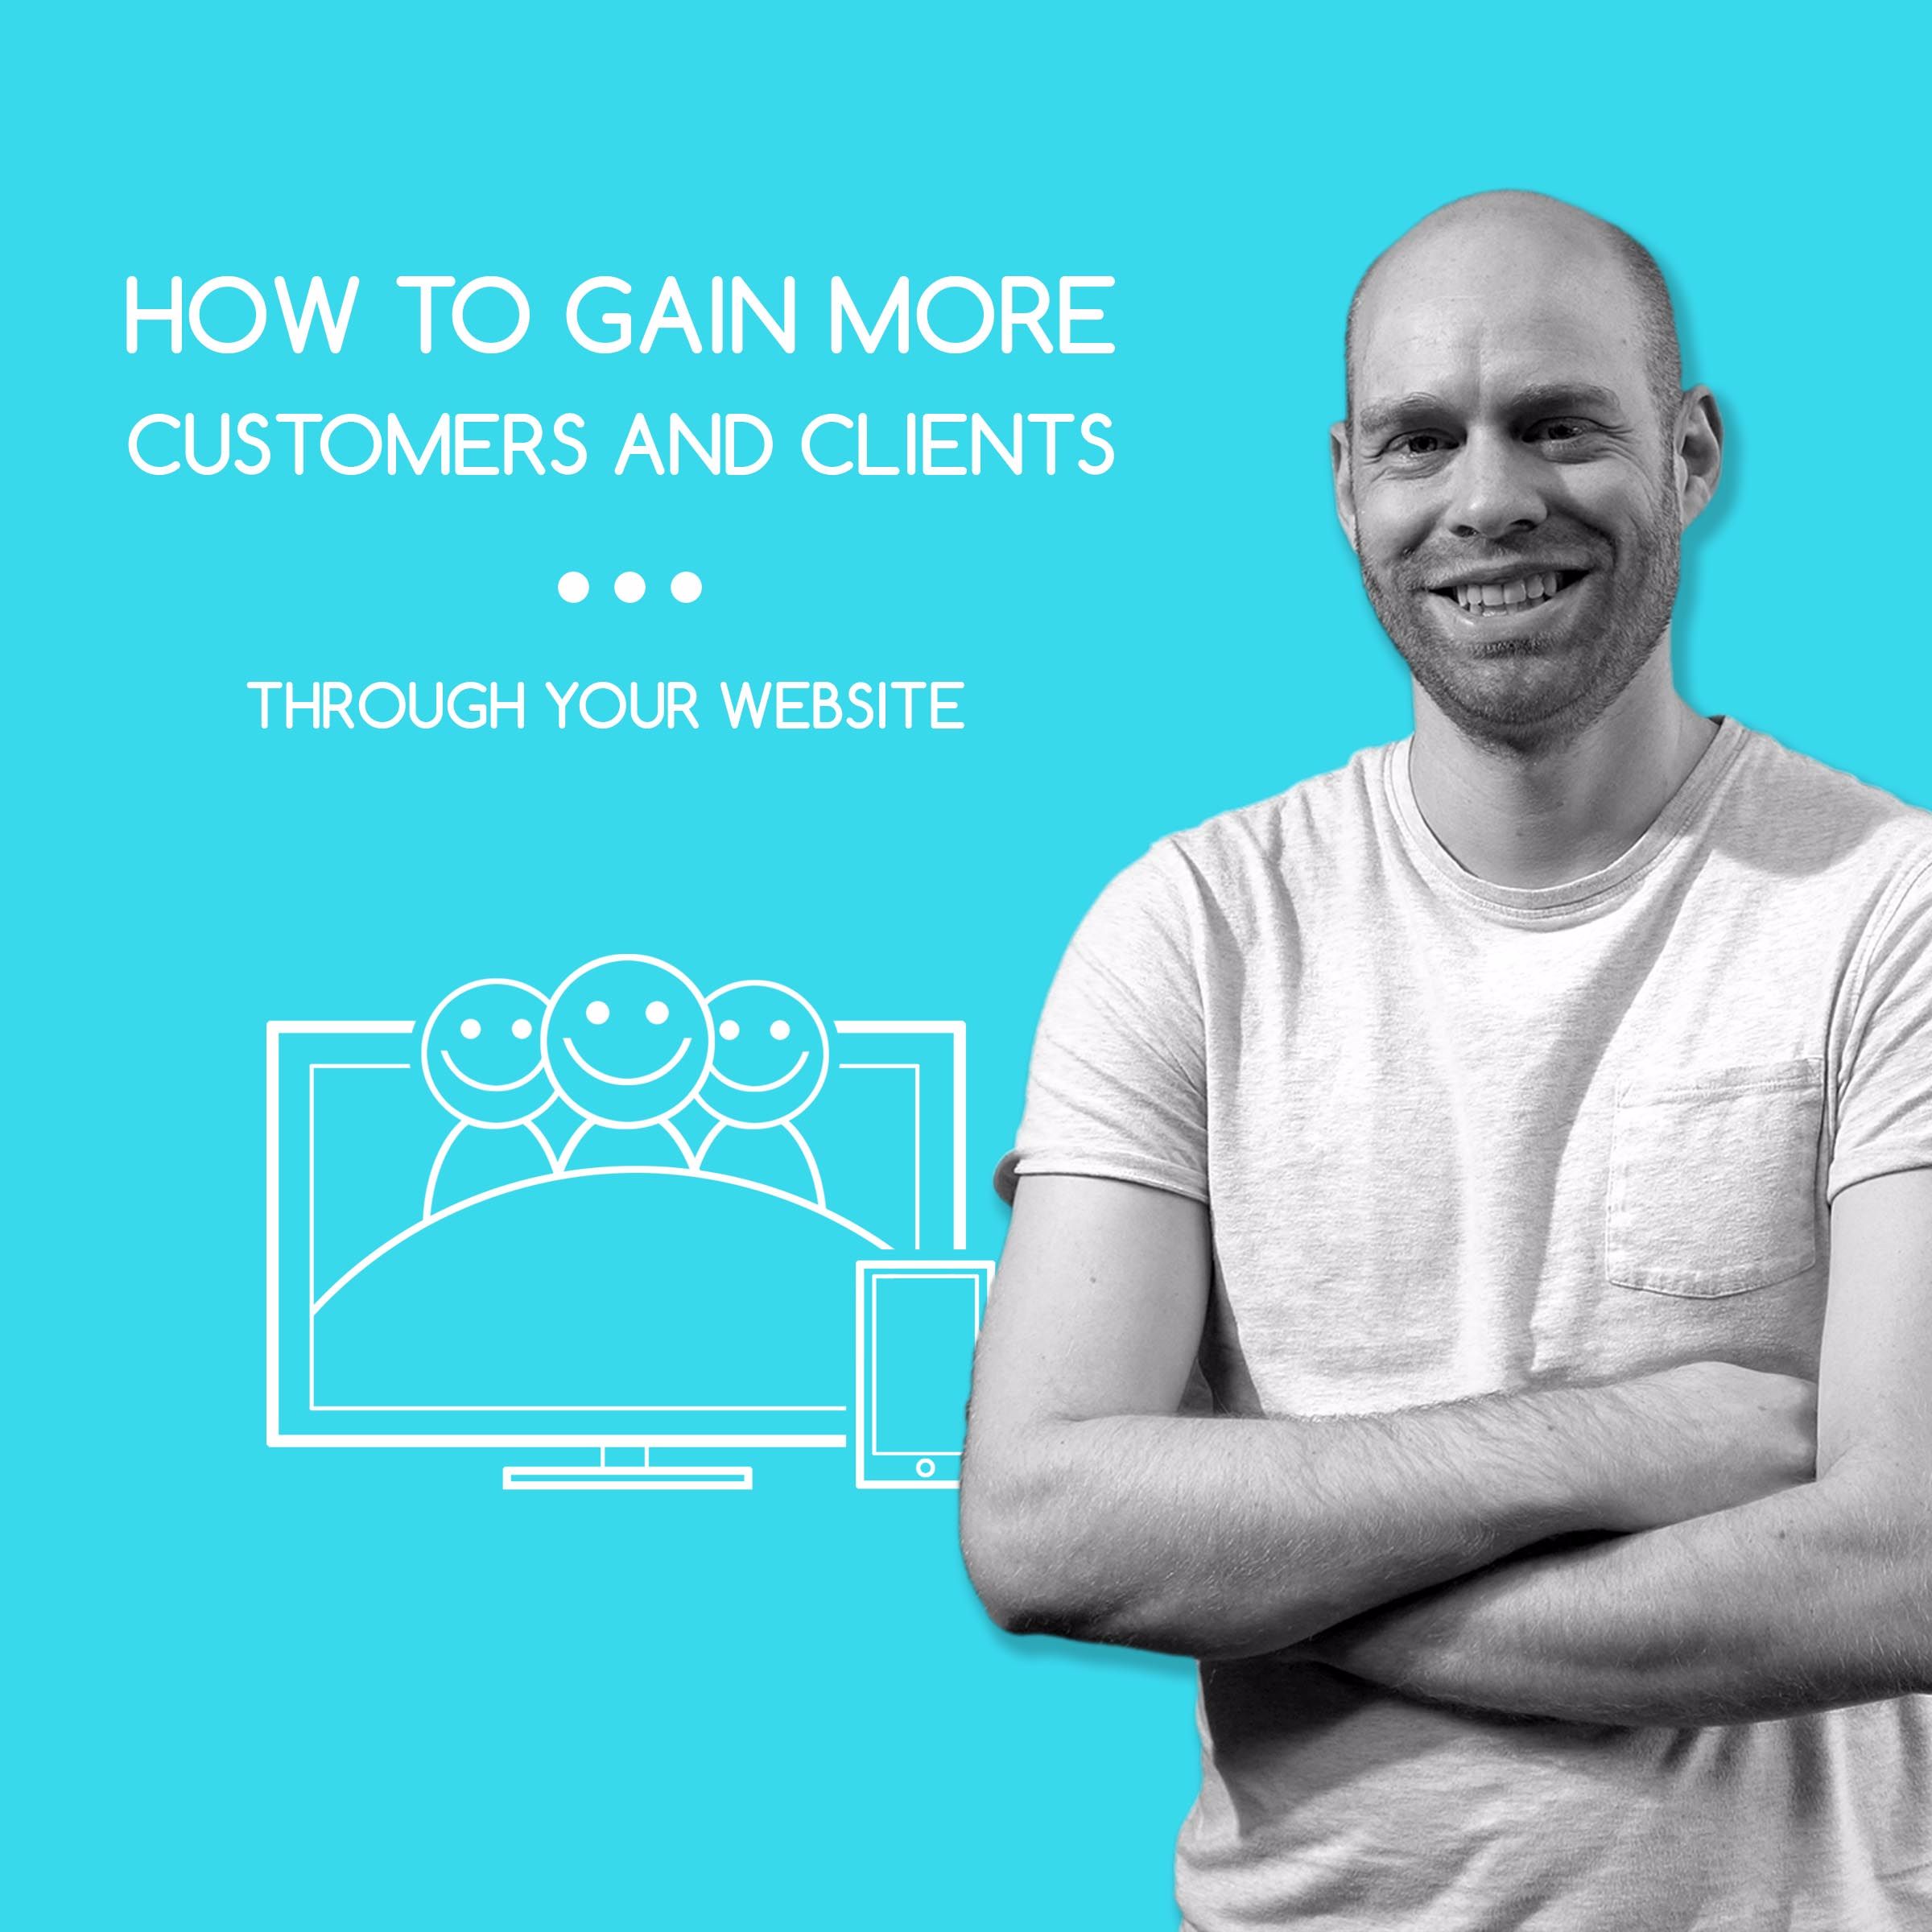 How to Gain More Customers and Clients Through Your Website